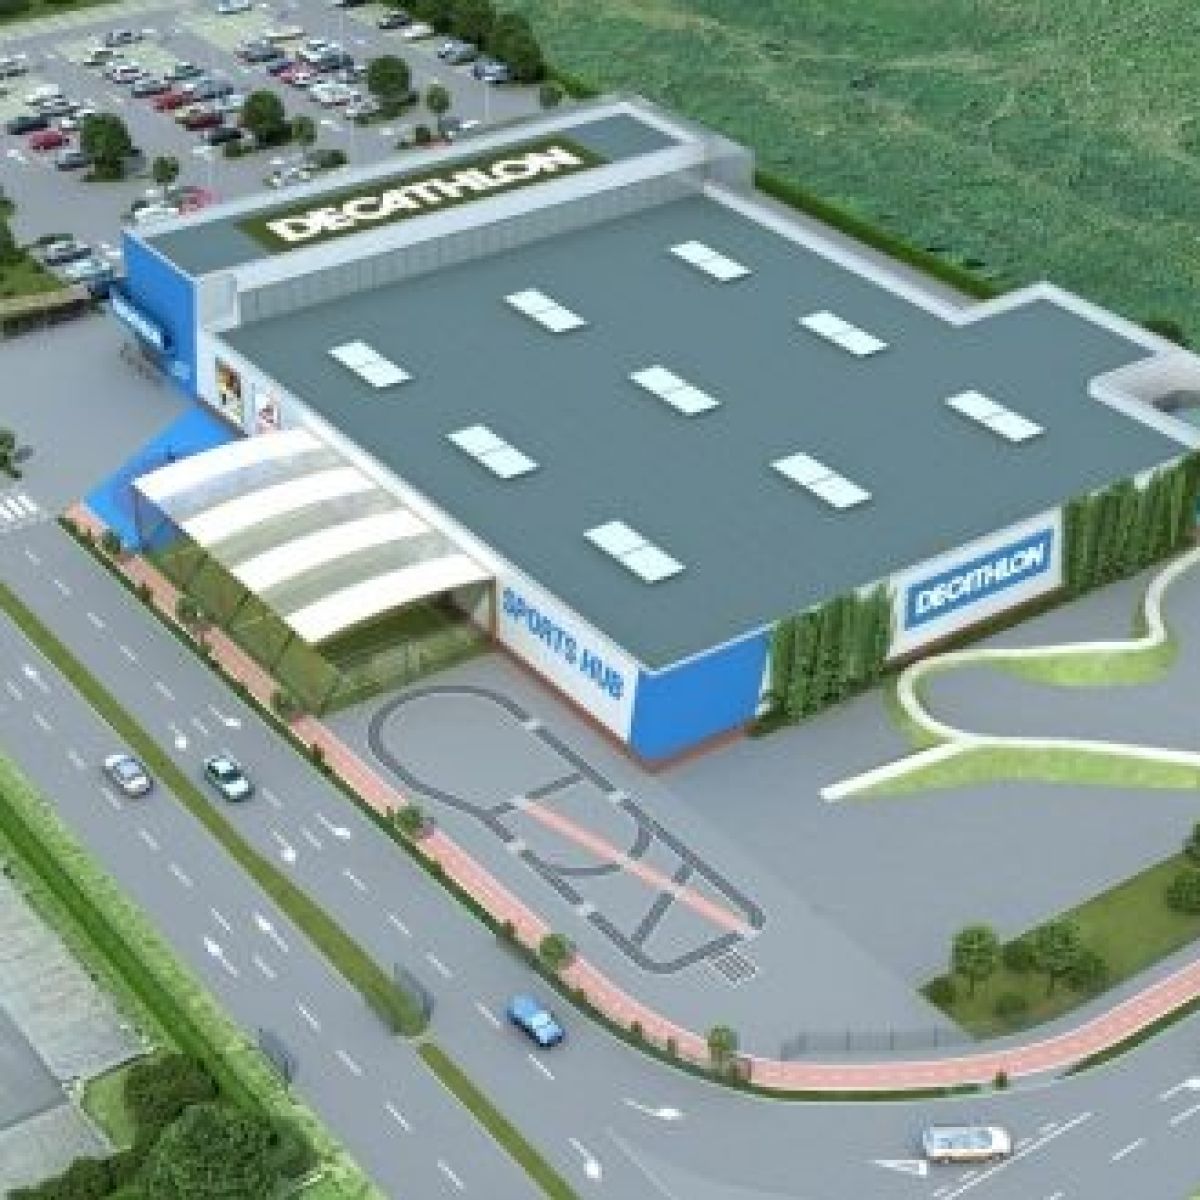 Decathlon plans April opening of new 